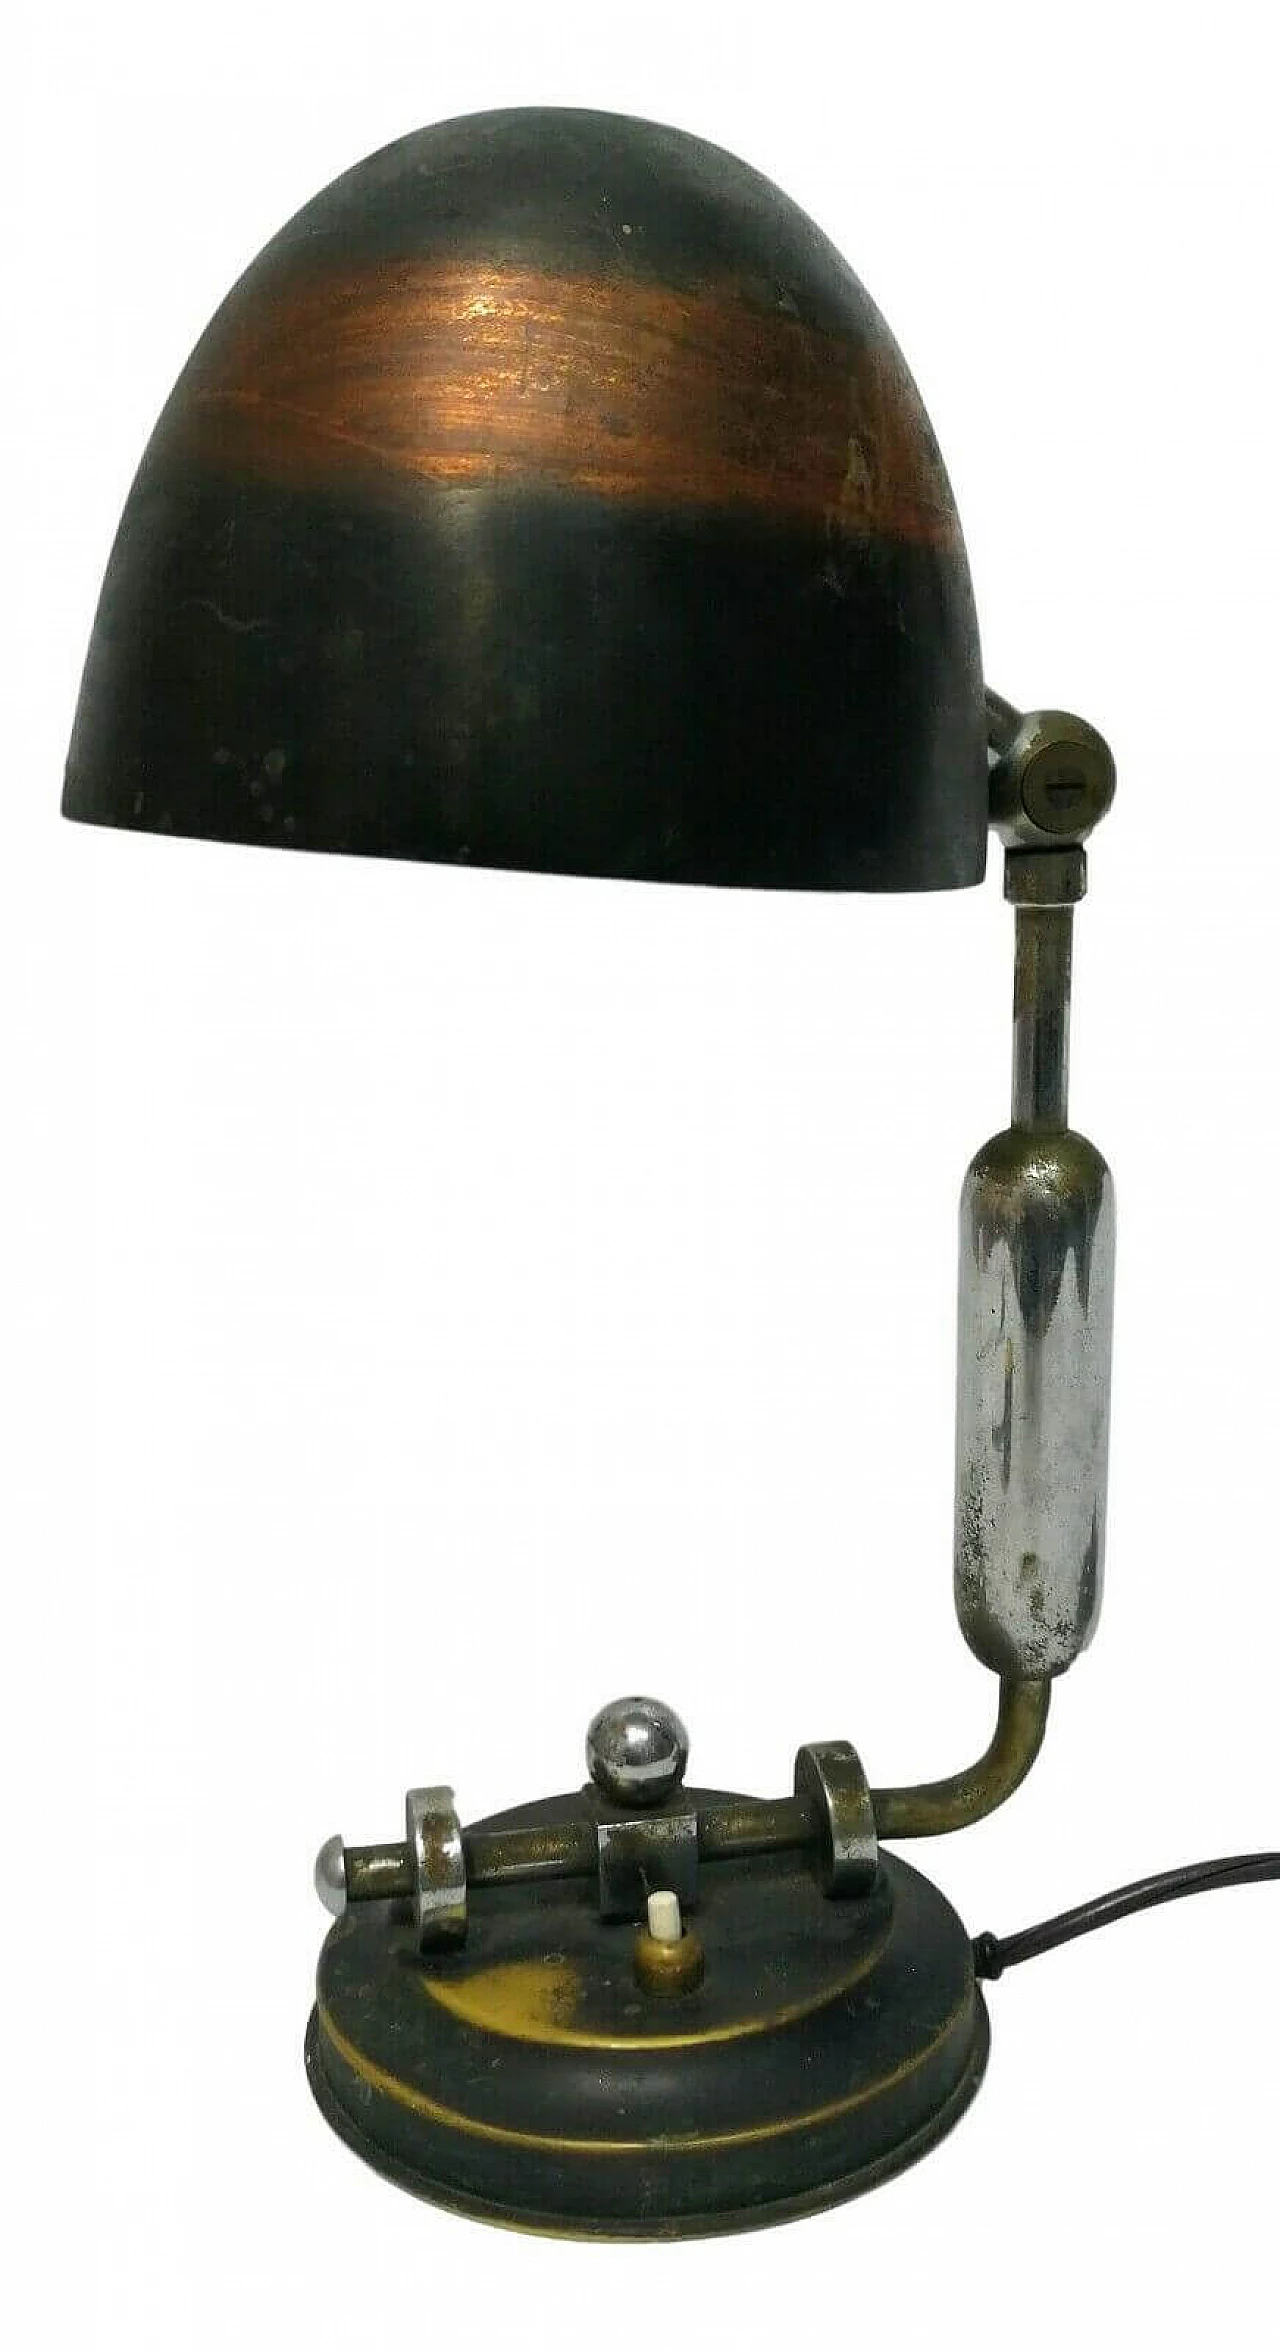 Bauhaus industrial table lamp by Anker Lyhne, 1950s 1163919